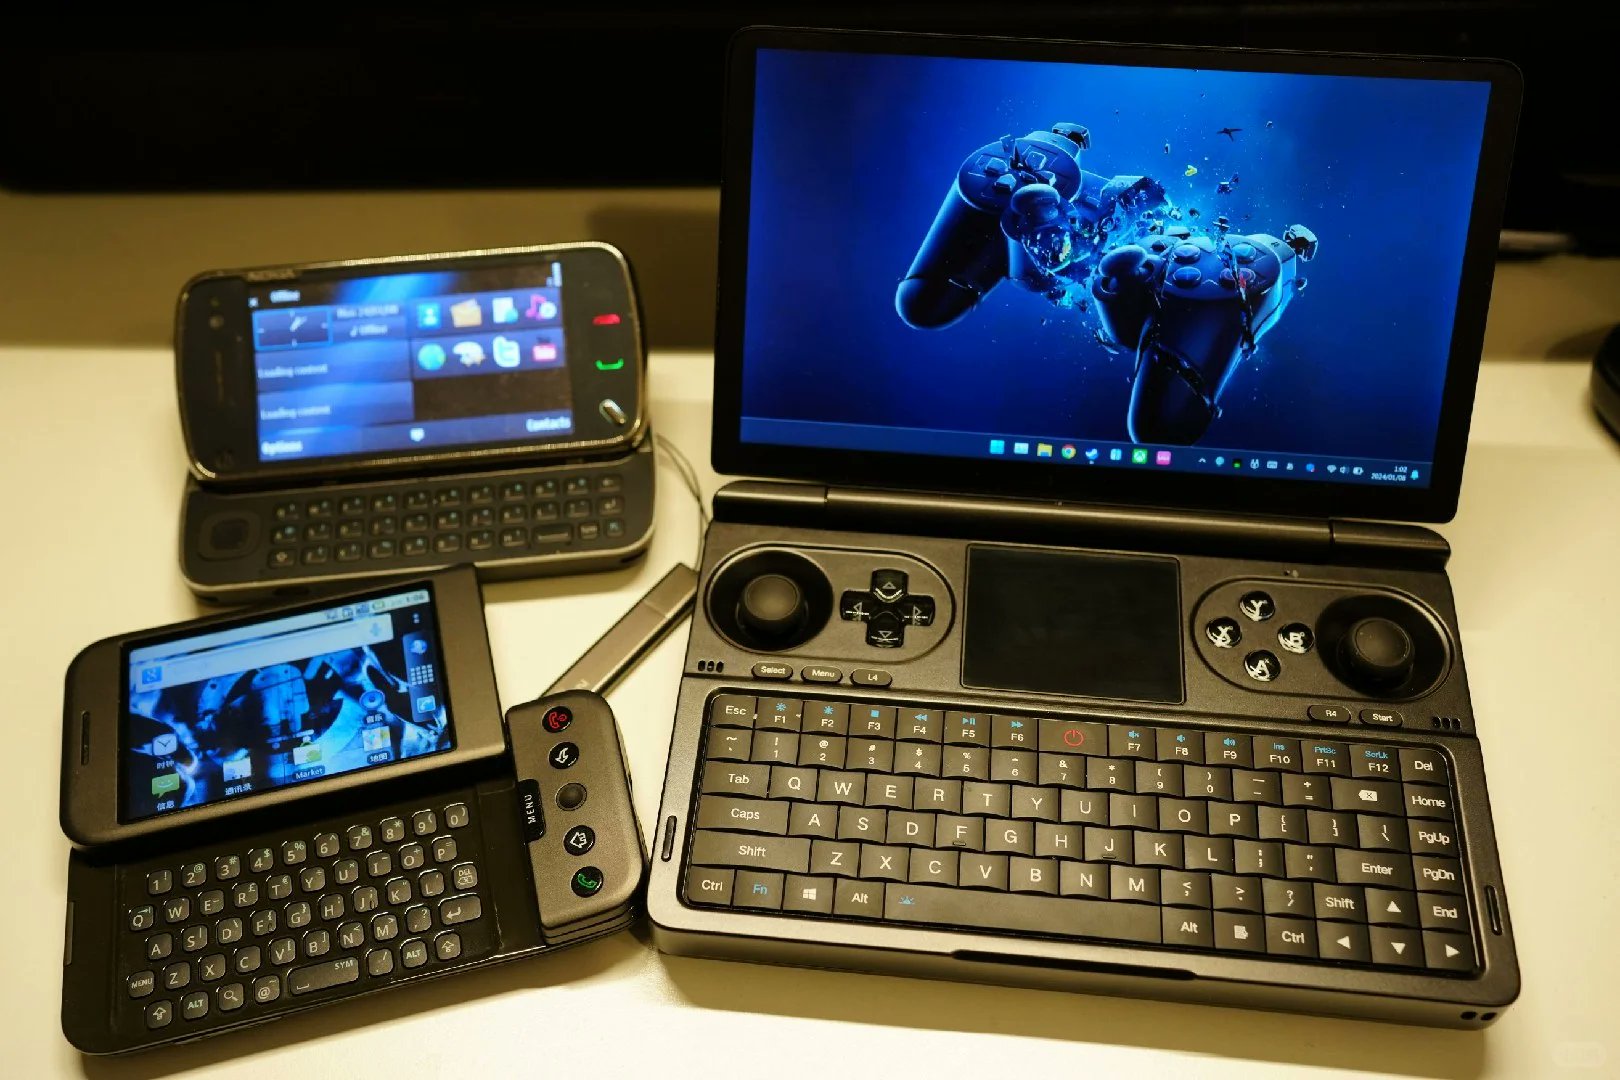 GPD Game Consoles (@softwincn) / X